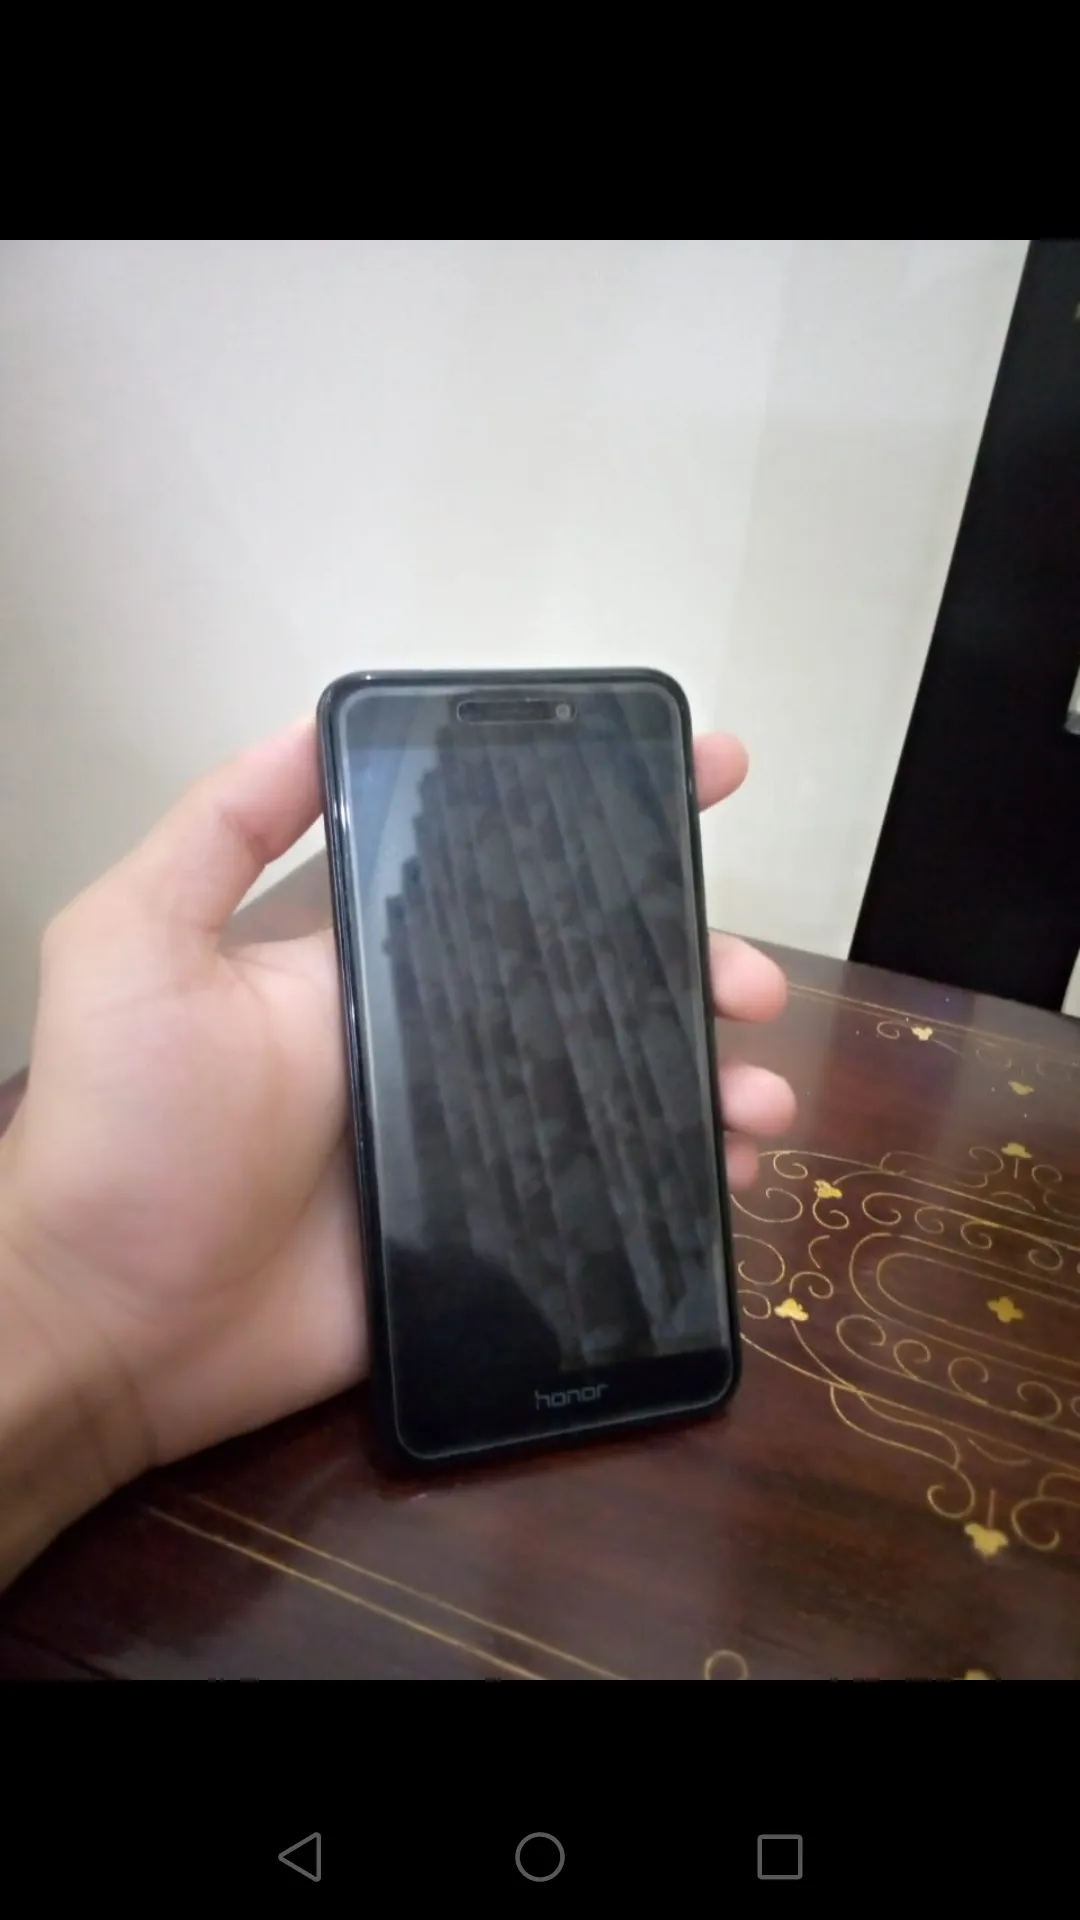 Huawei Honor 8 Lite for sale in perfect working condition - photo 3